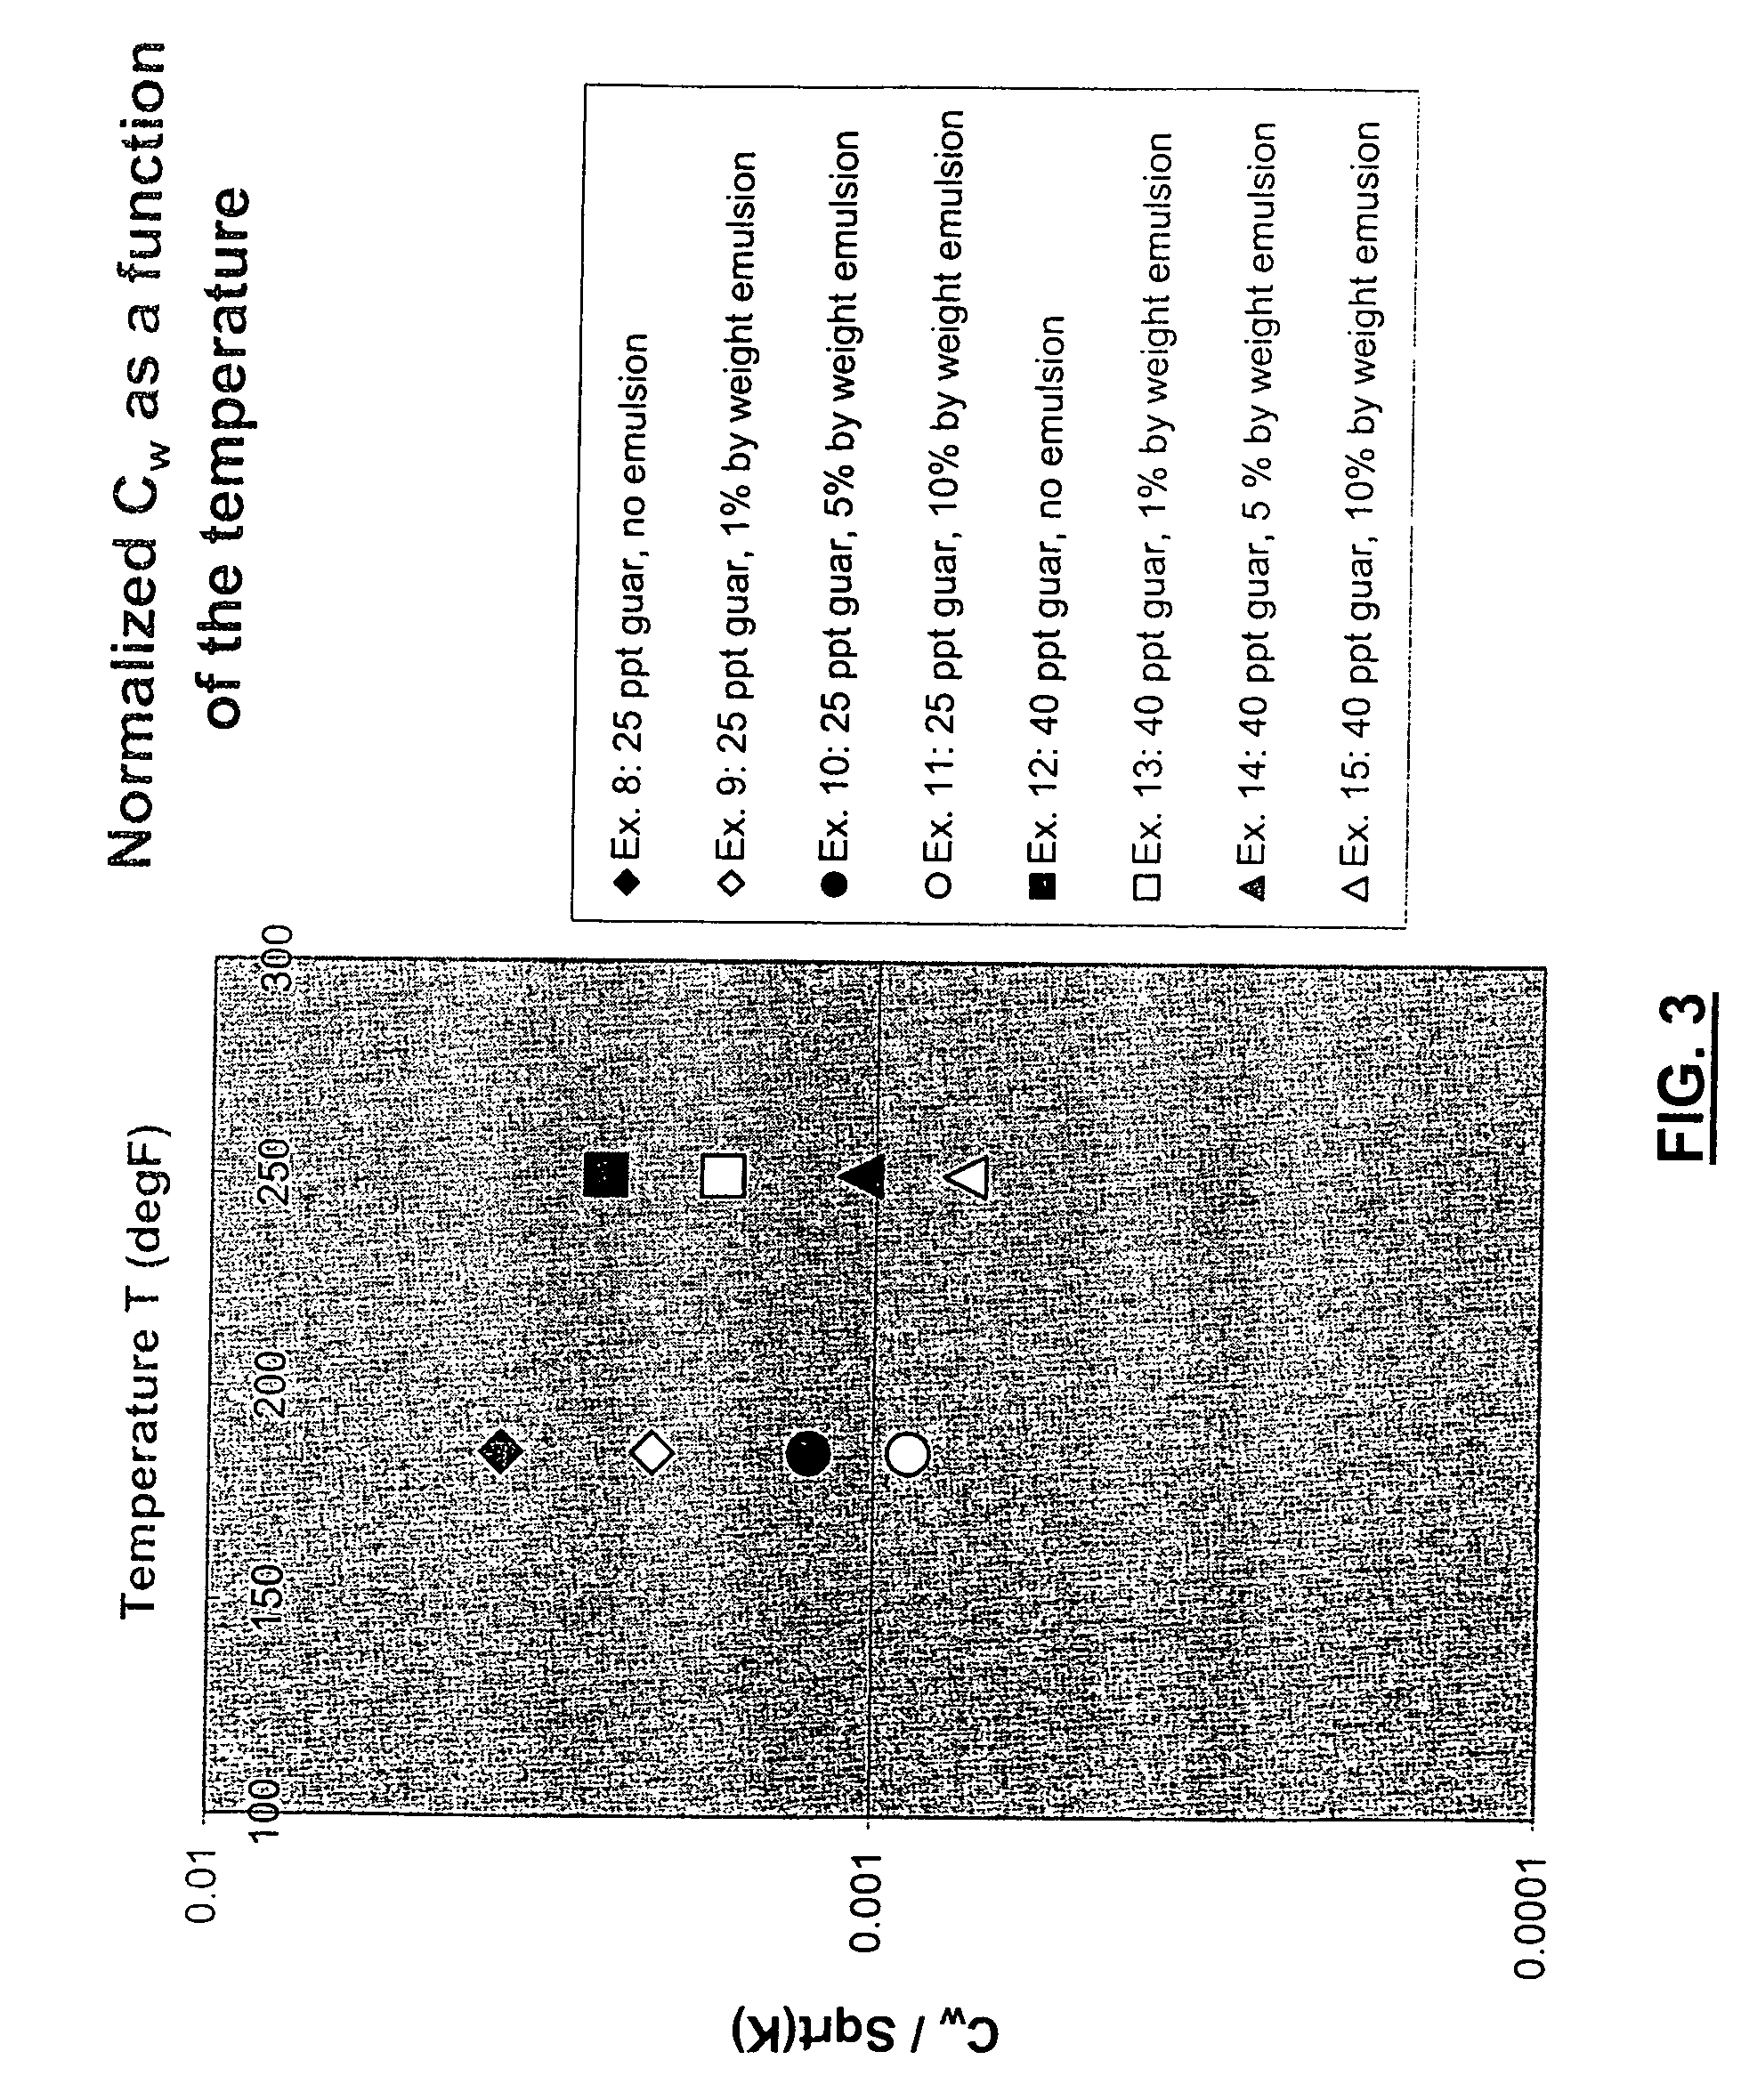 Methods of limiting leak off and damage in hydraulic fractures